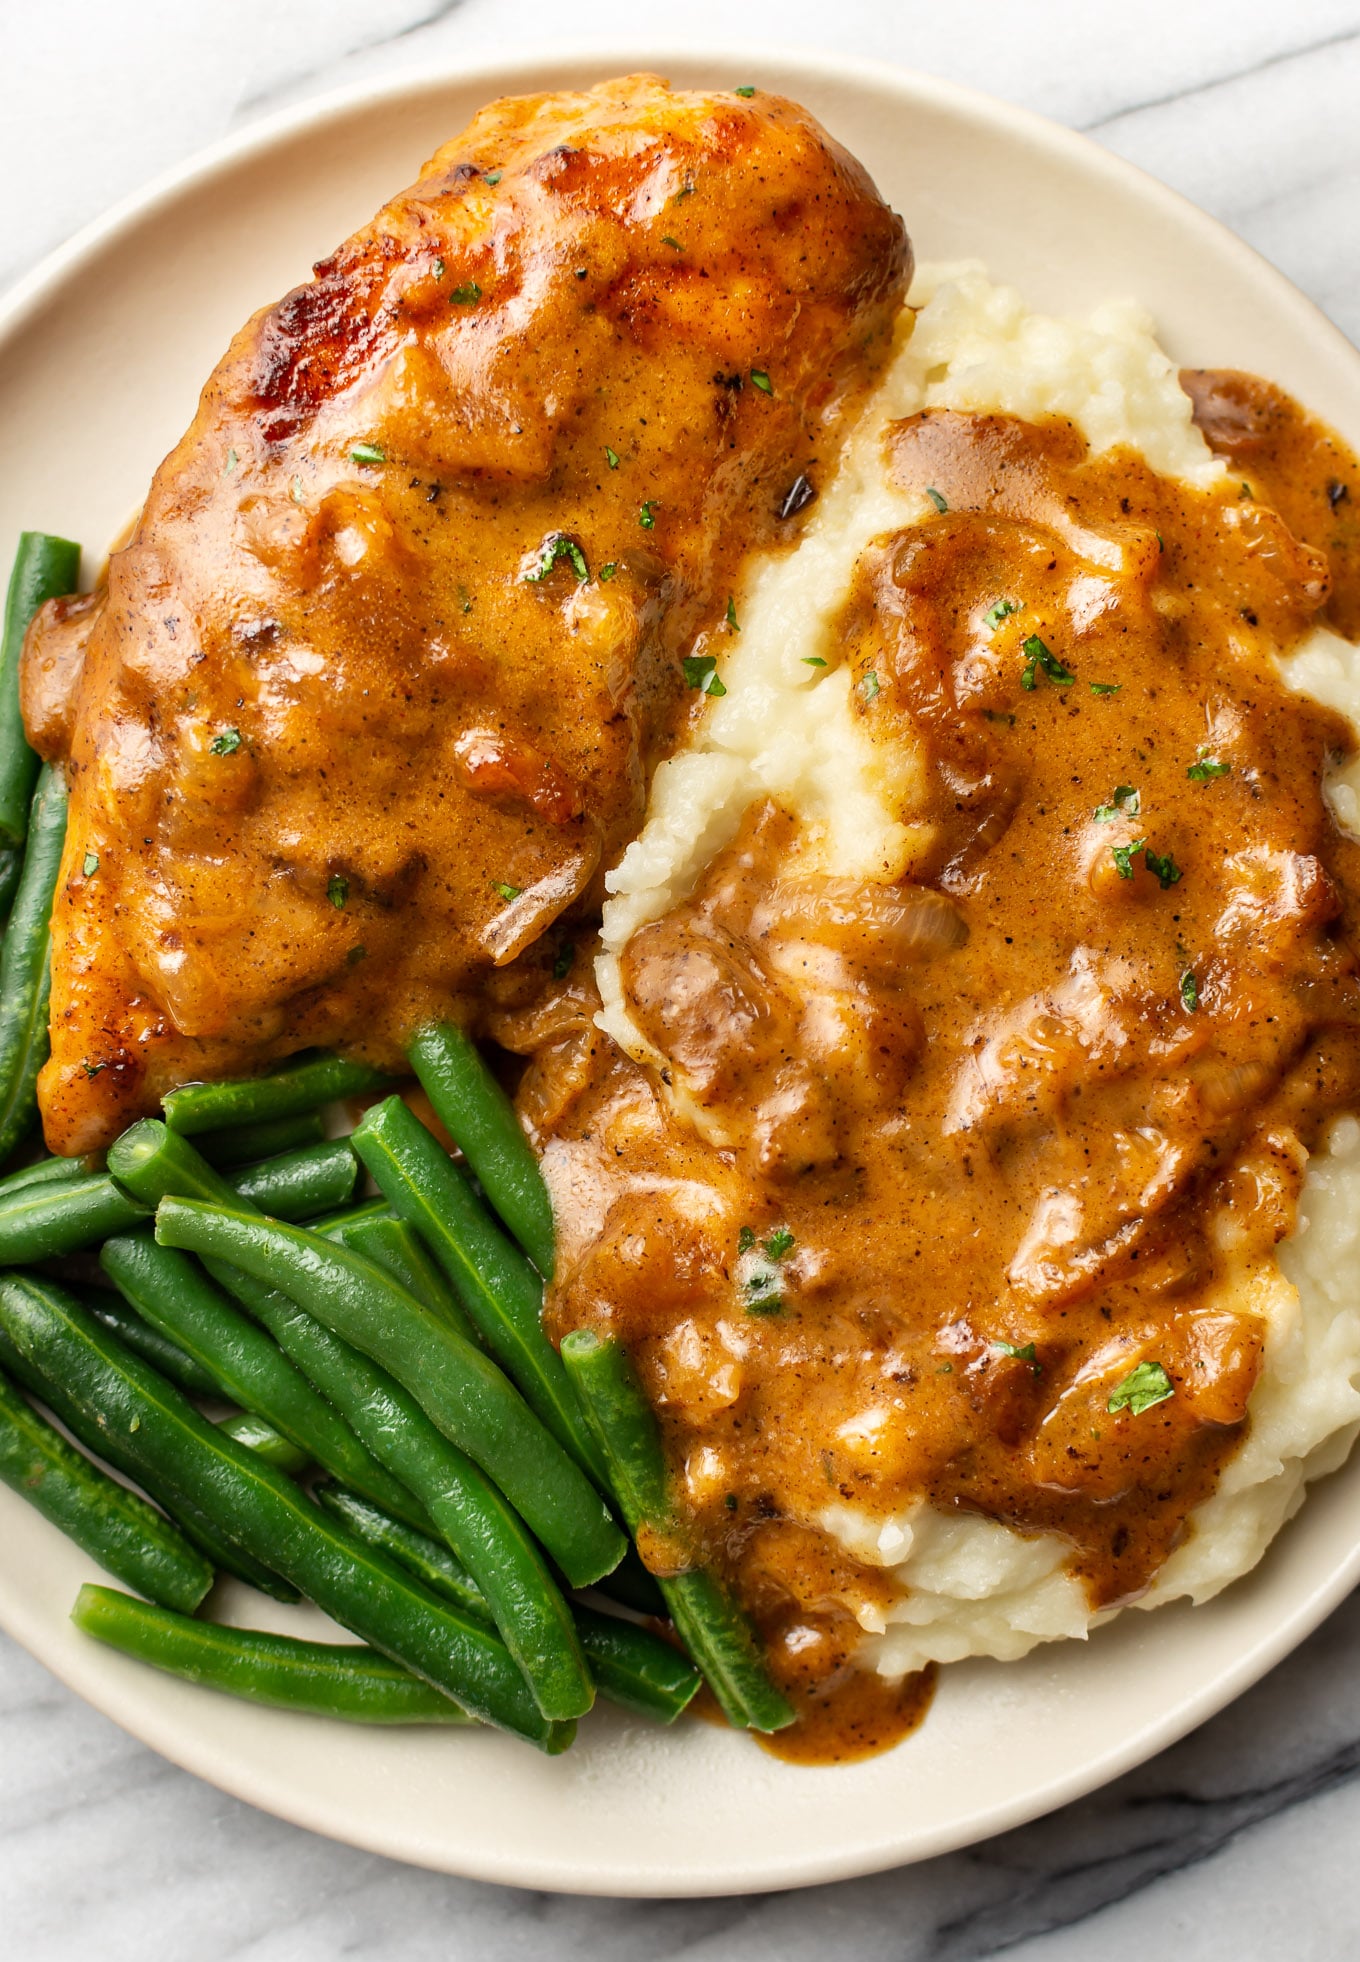 Top 3 Smothered Chicken Recipes